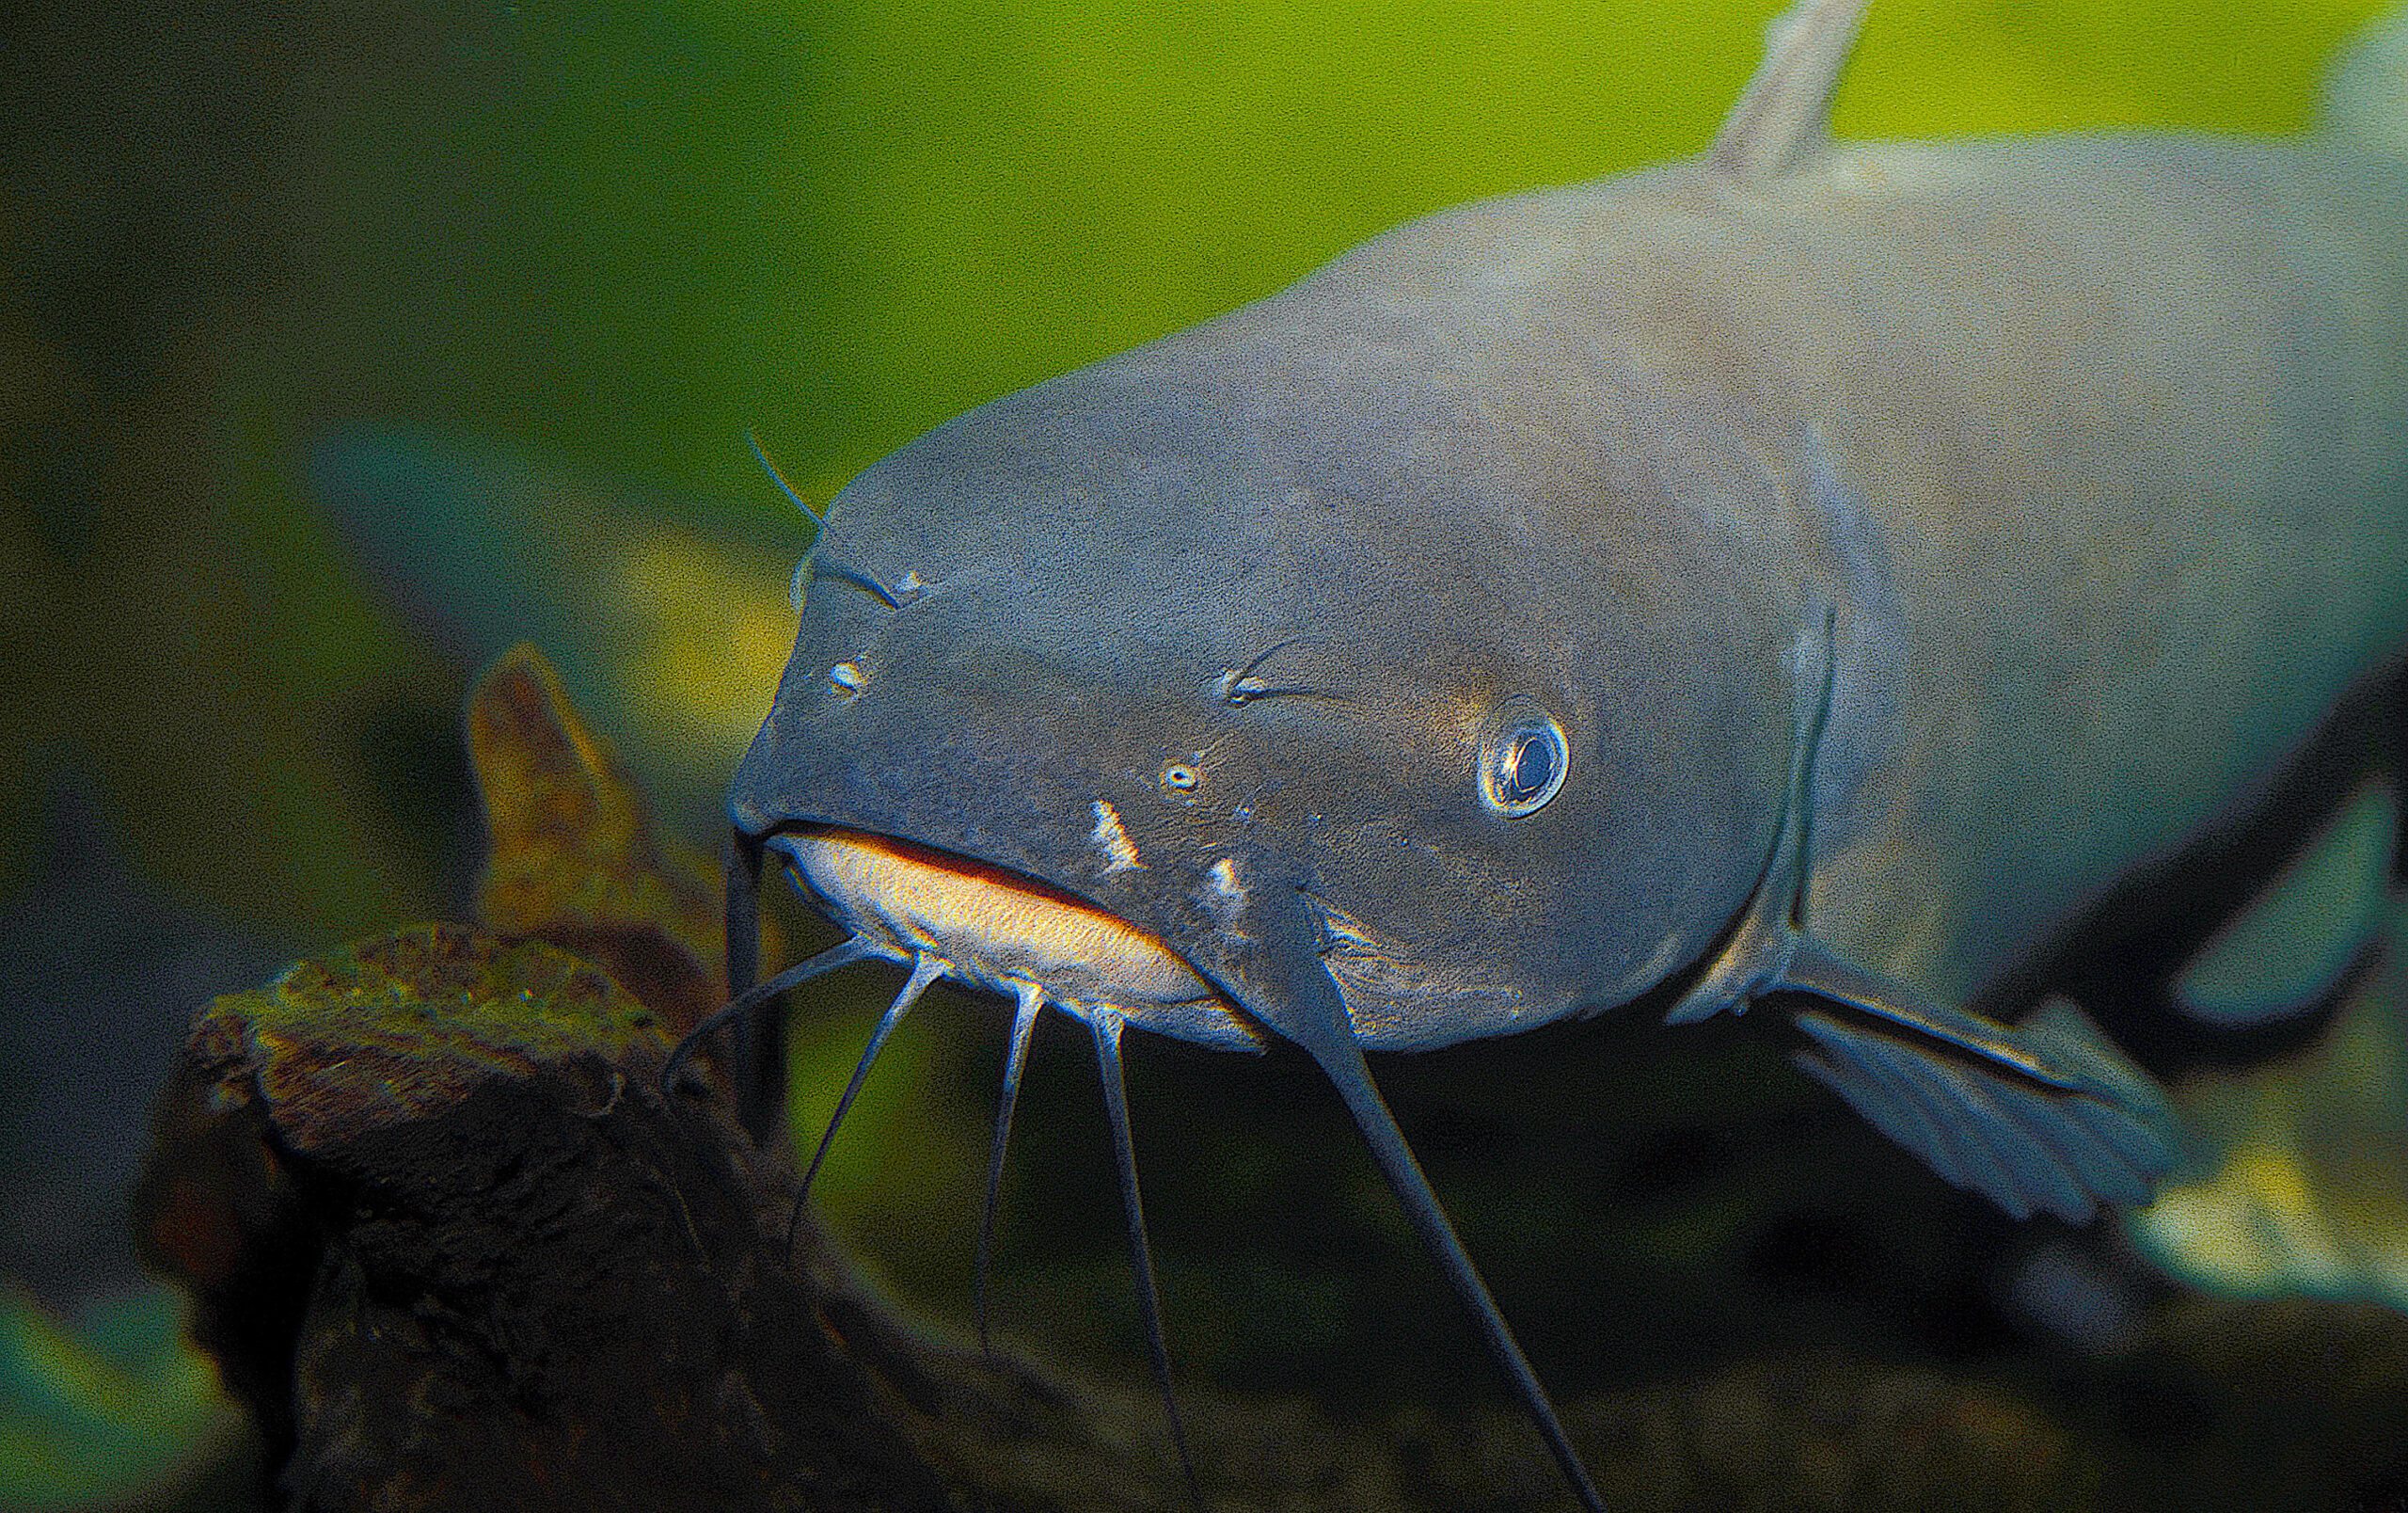 image: channel catfish faces the camera.